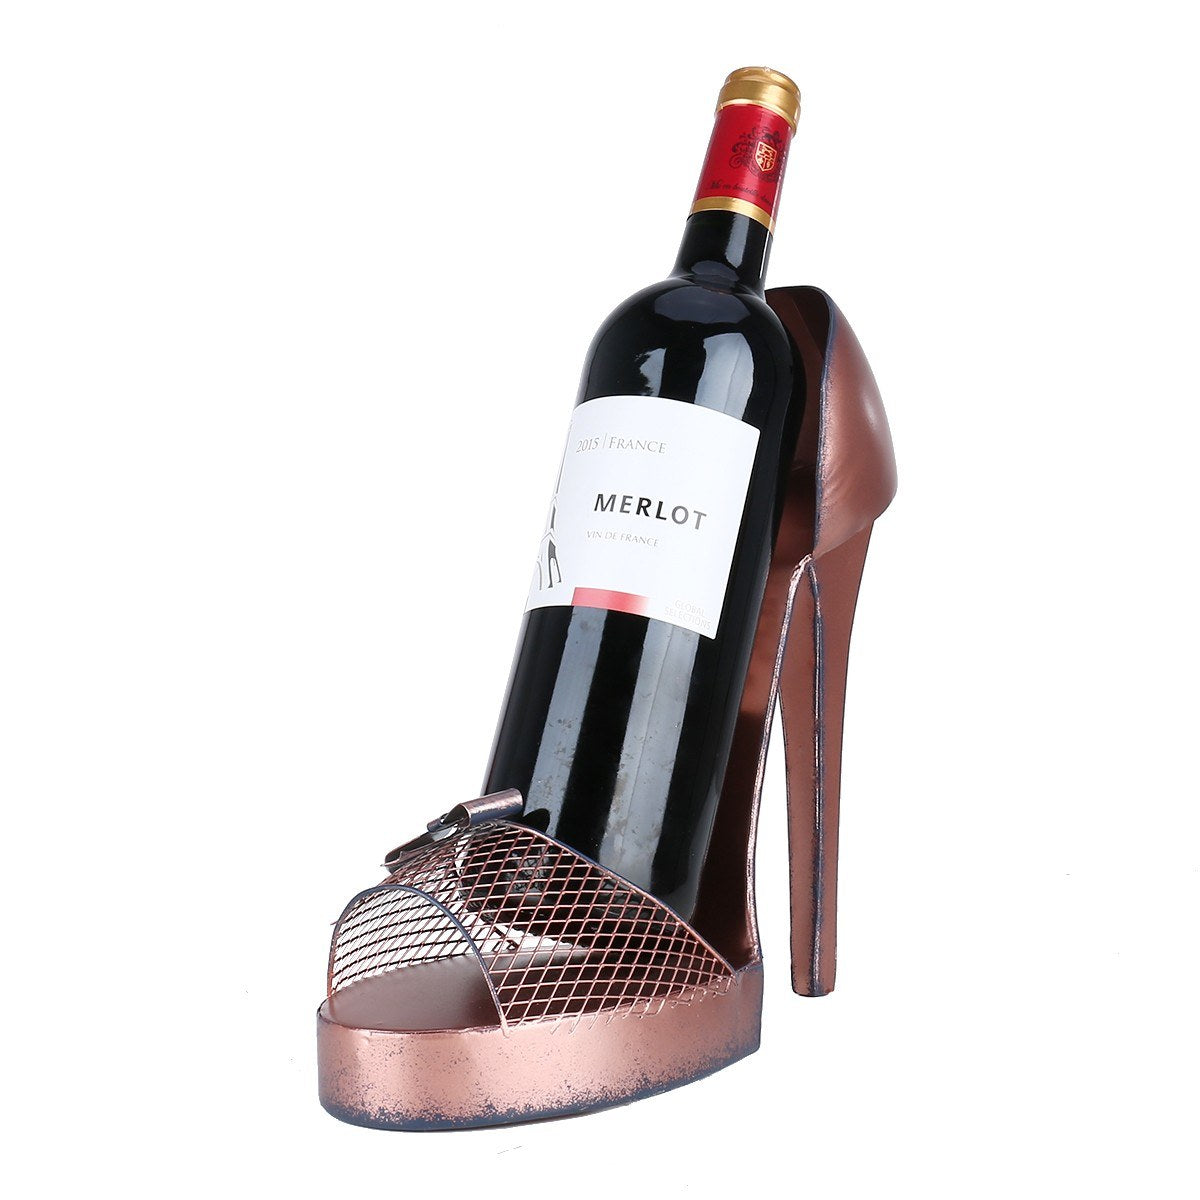 Funny single wine bottle holder, It's never been easier to organize your wine